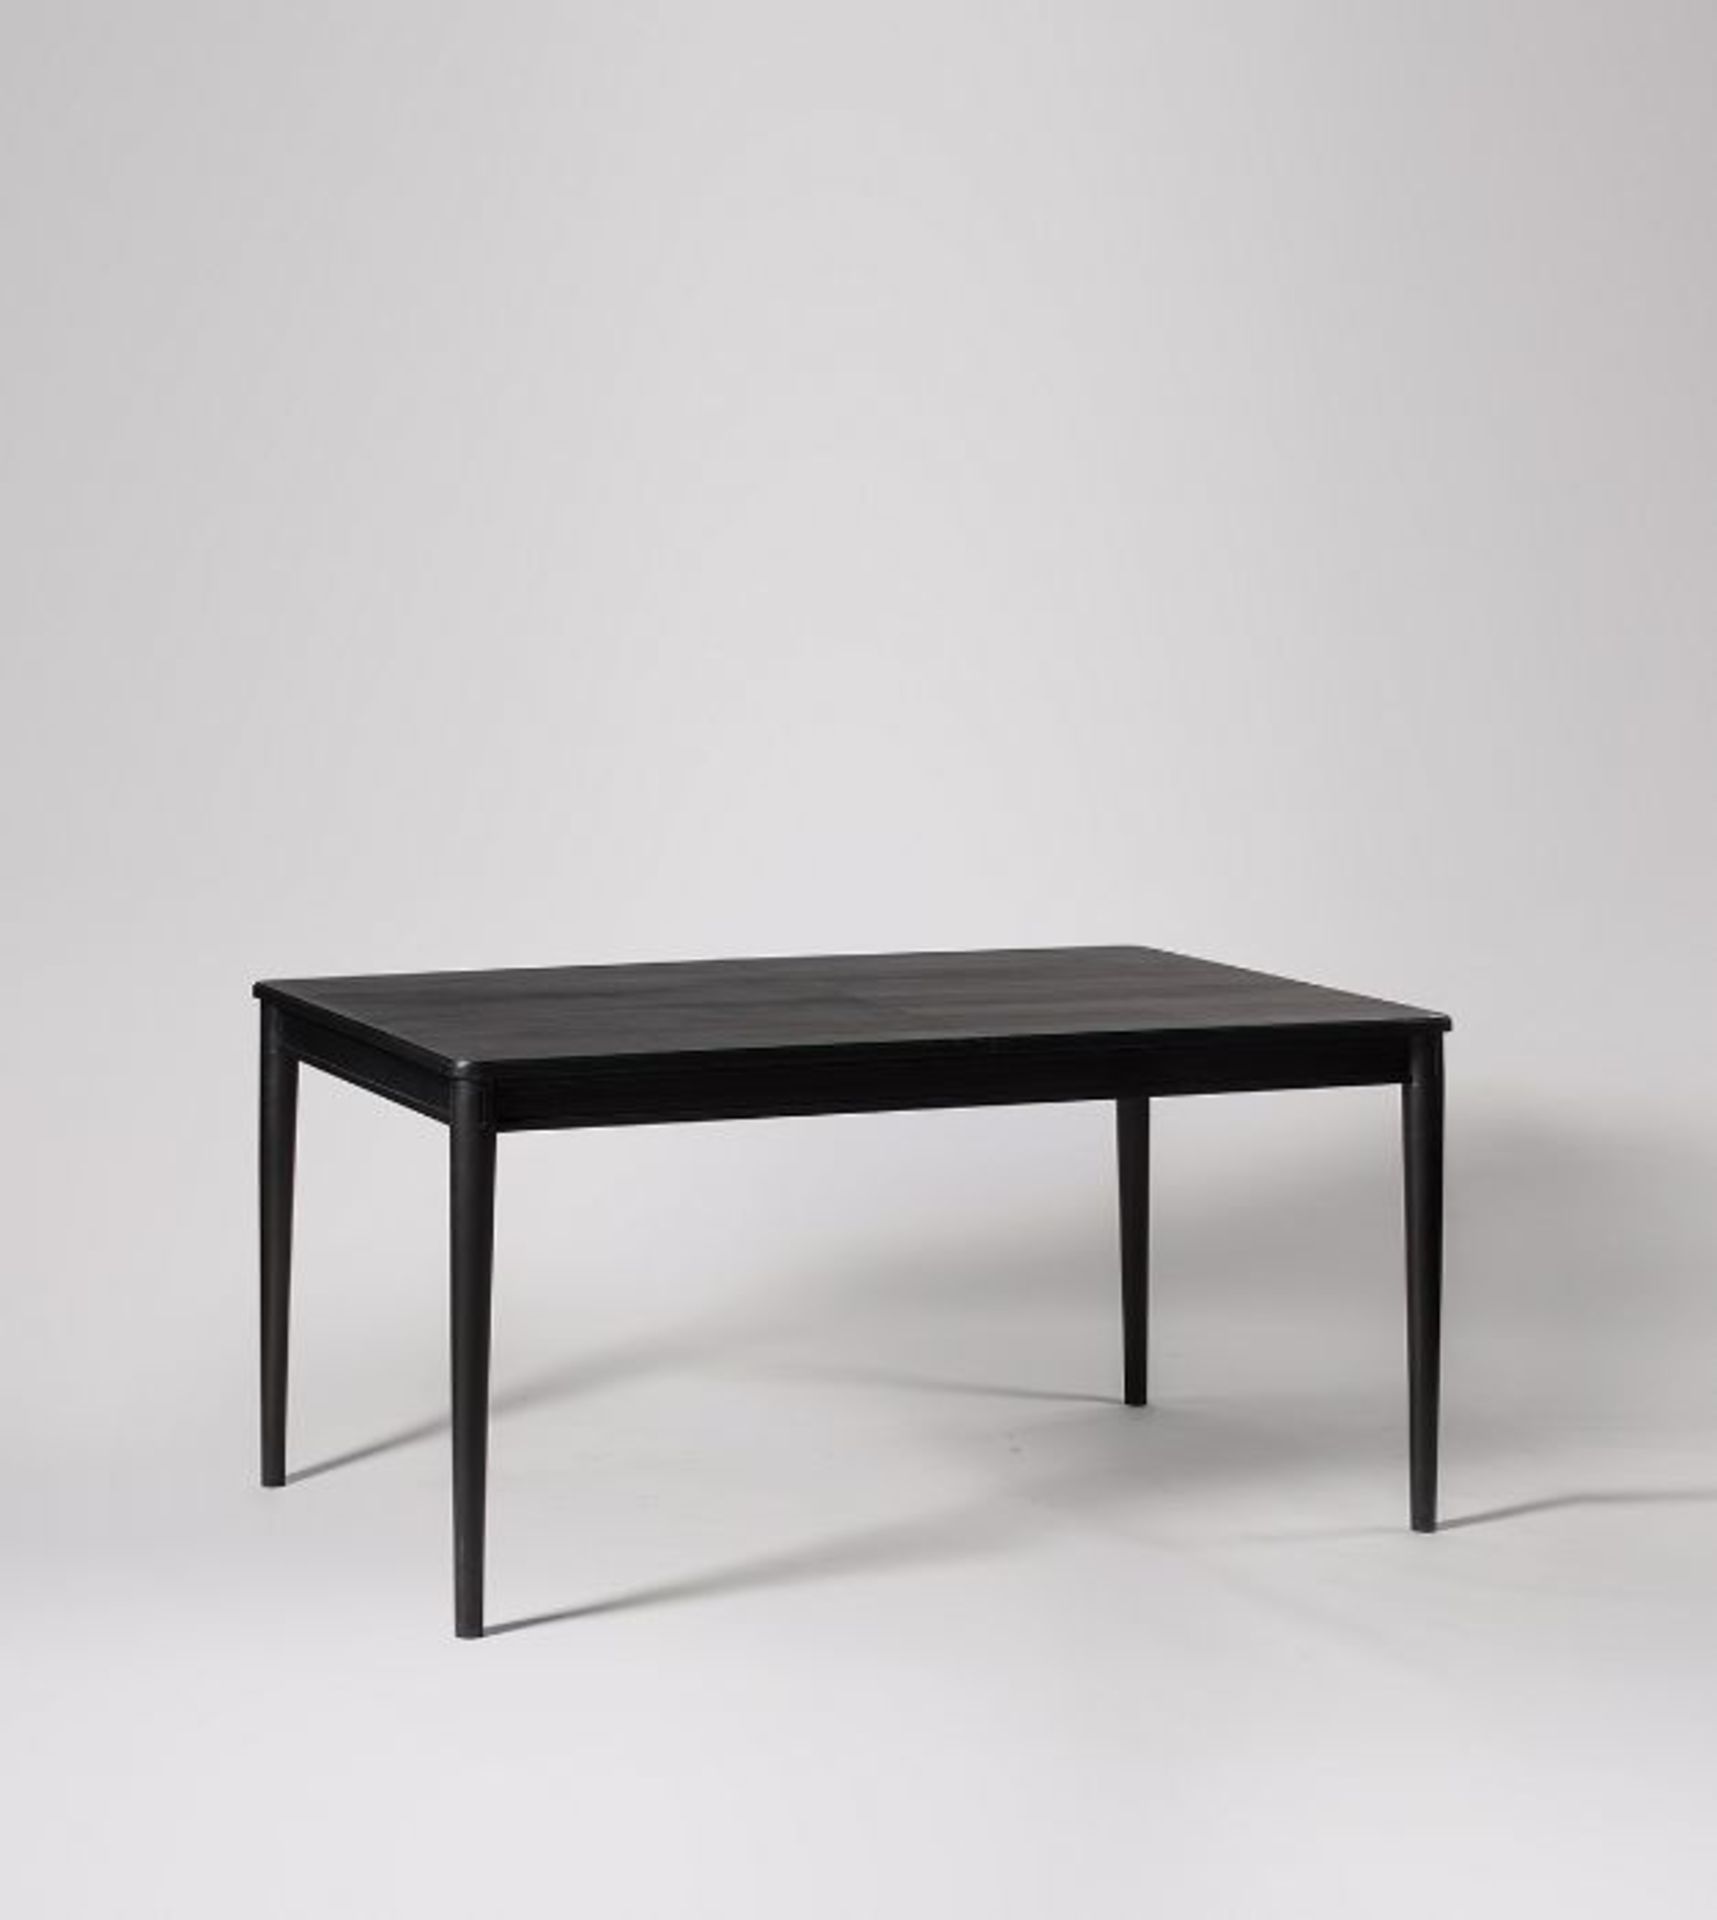 Swoon Reyna Extending Dining Table in Charcoal and Brass RRP ?599 Swoon Reyna Extending Dining Table - Image 6 of 7